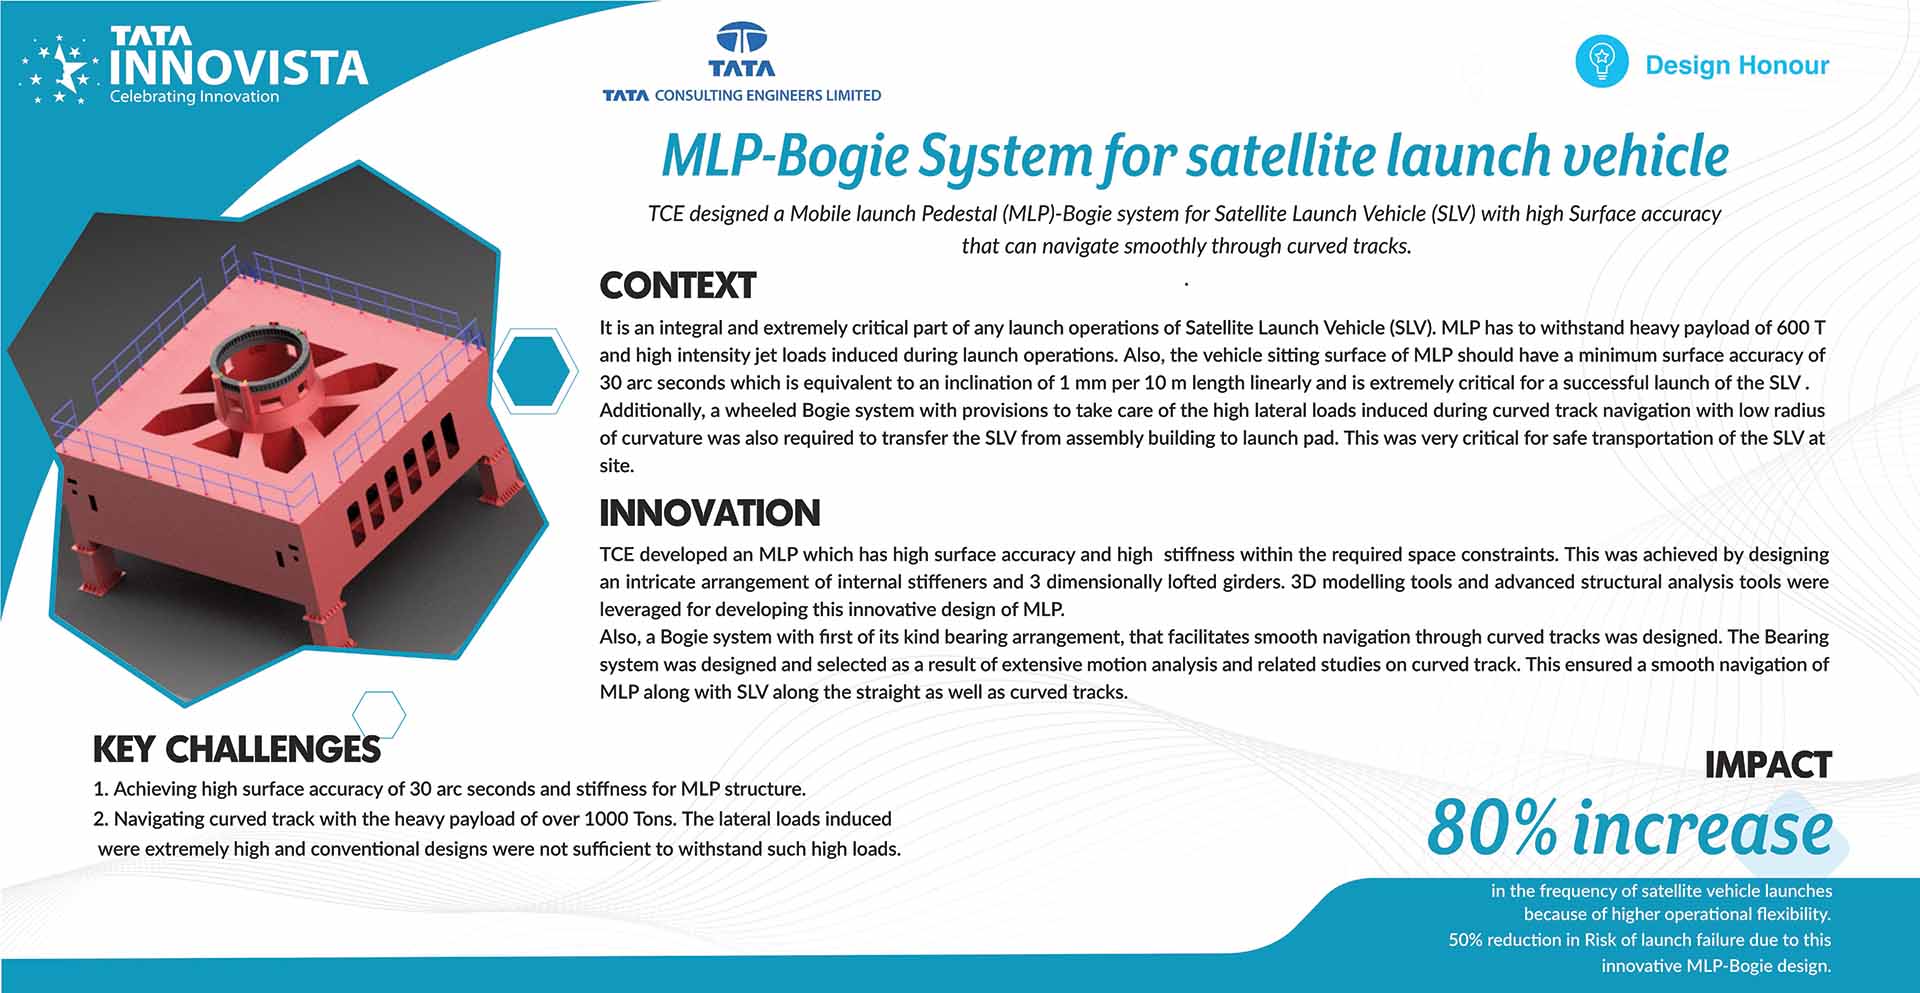 MLP-Bogie System for Satellite Launch Vehicle